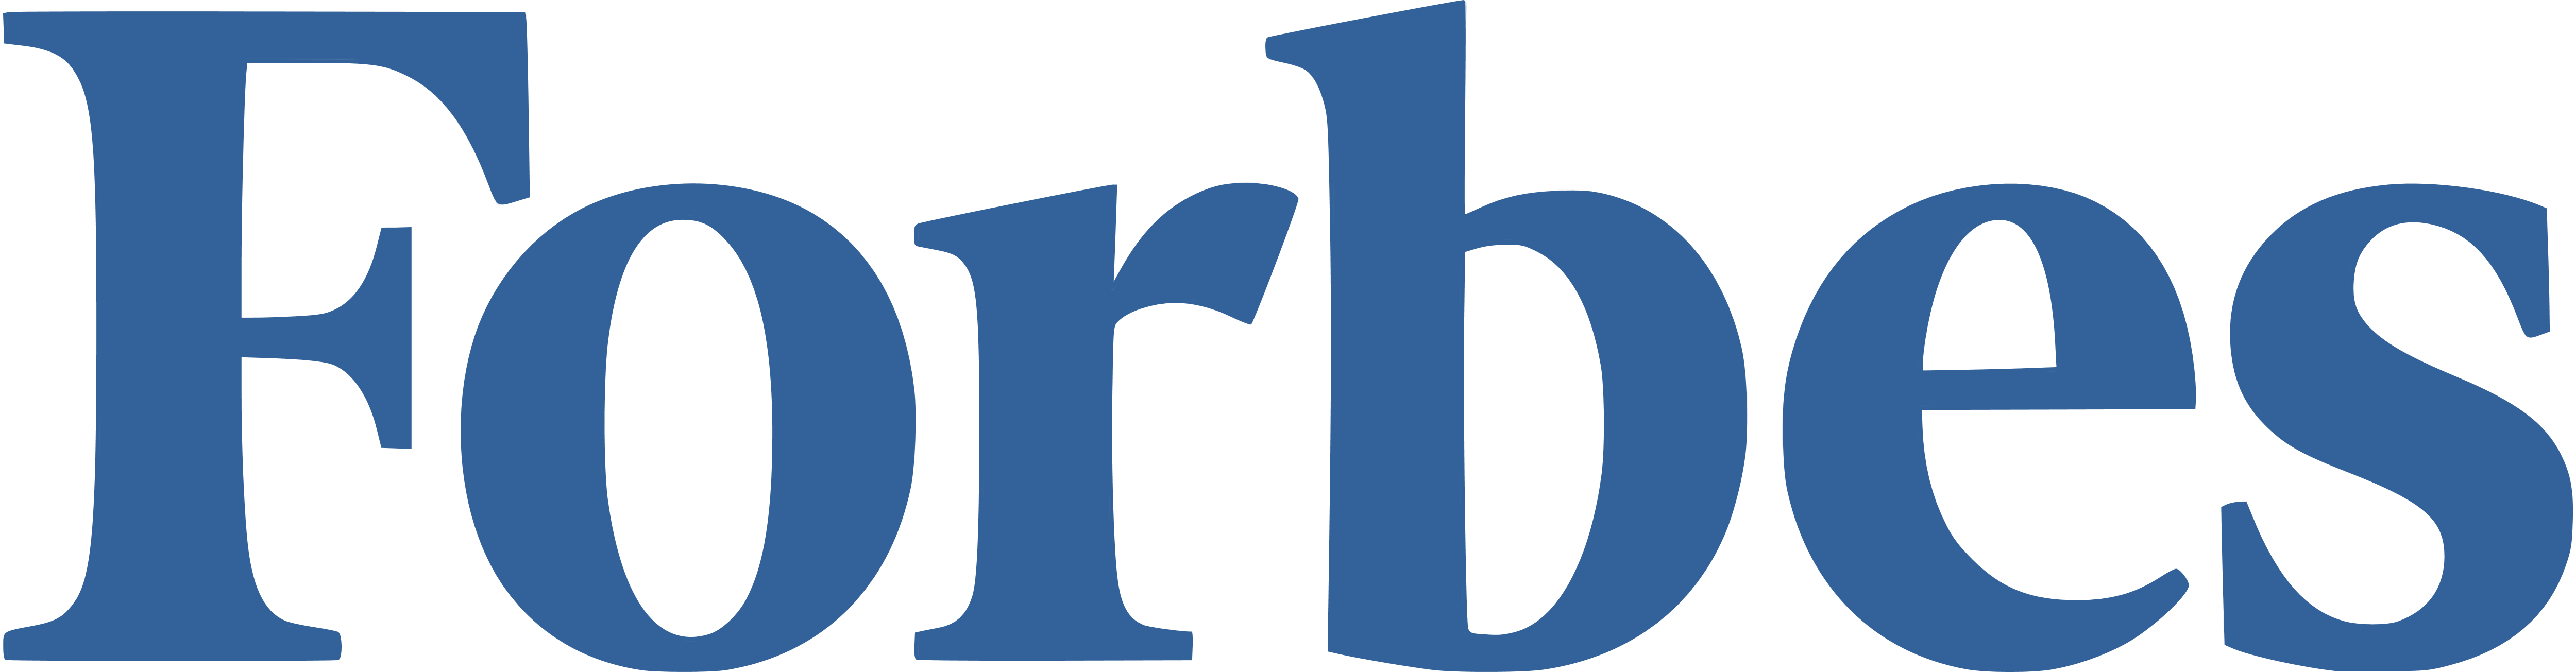 Forbes Logo Png Download - 20